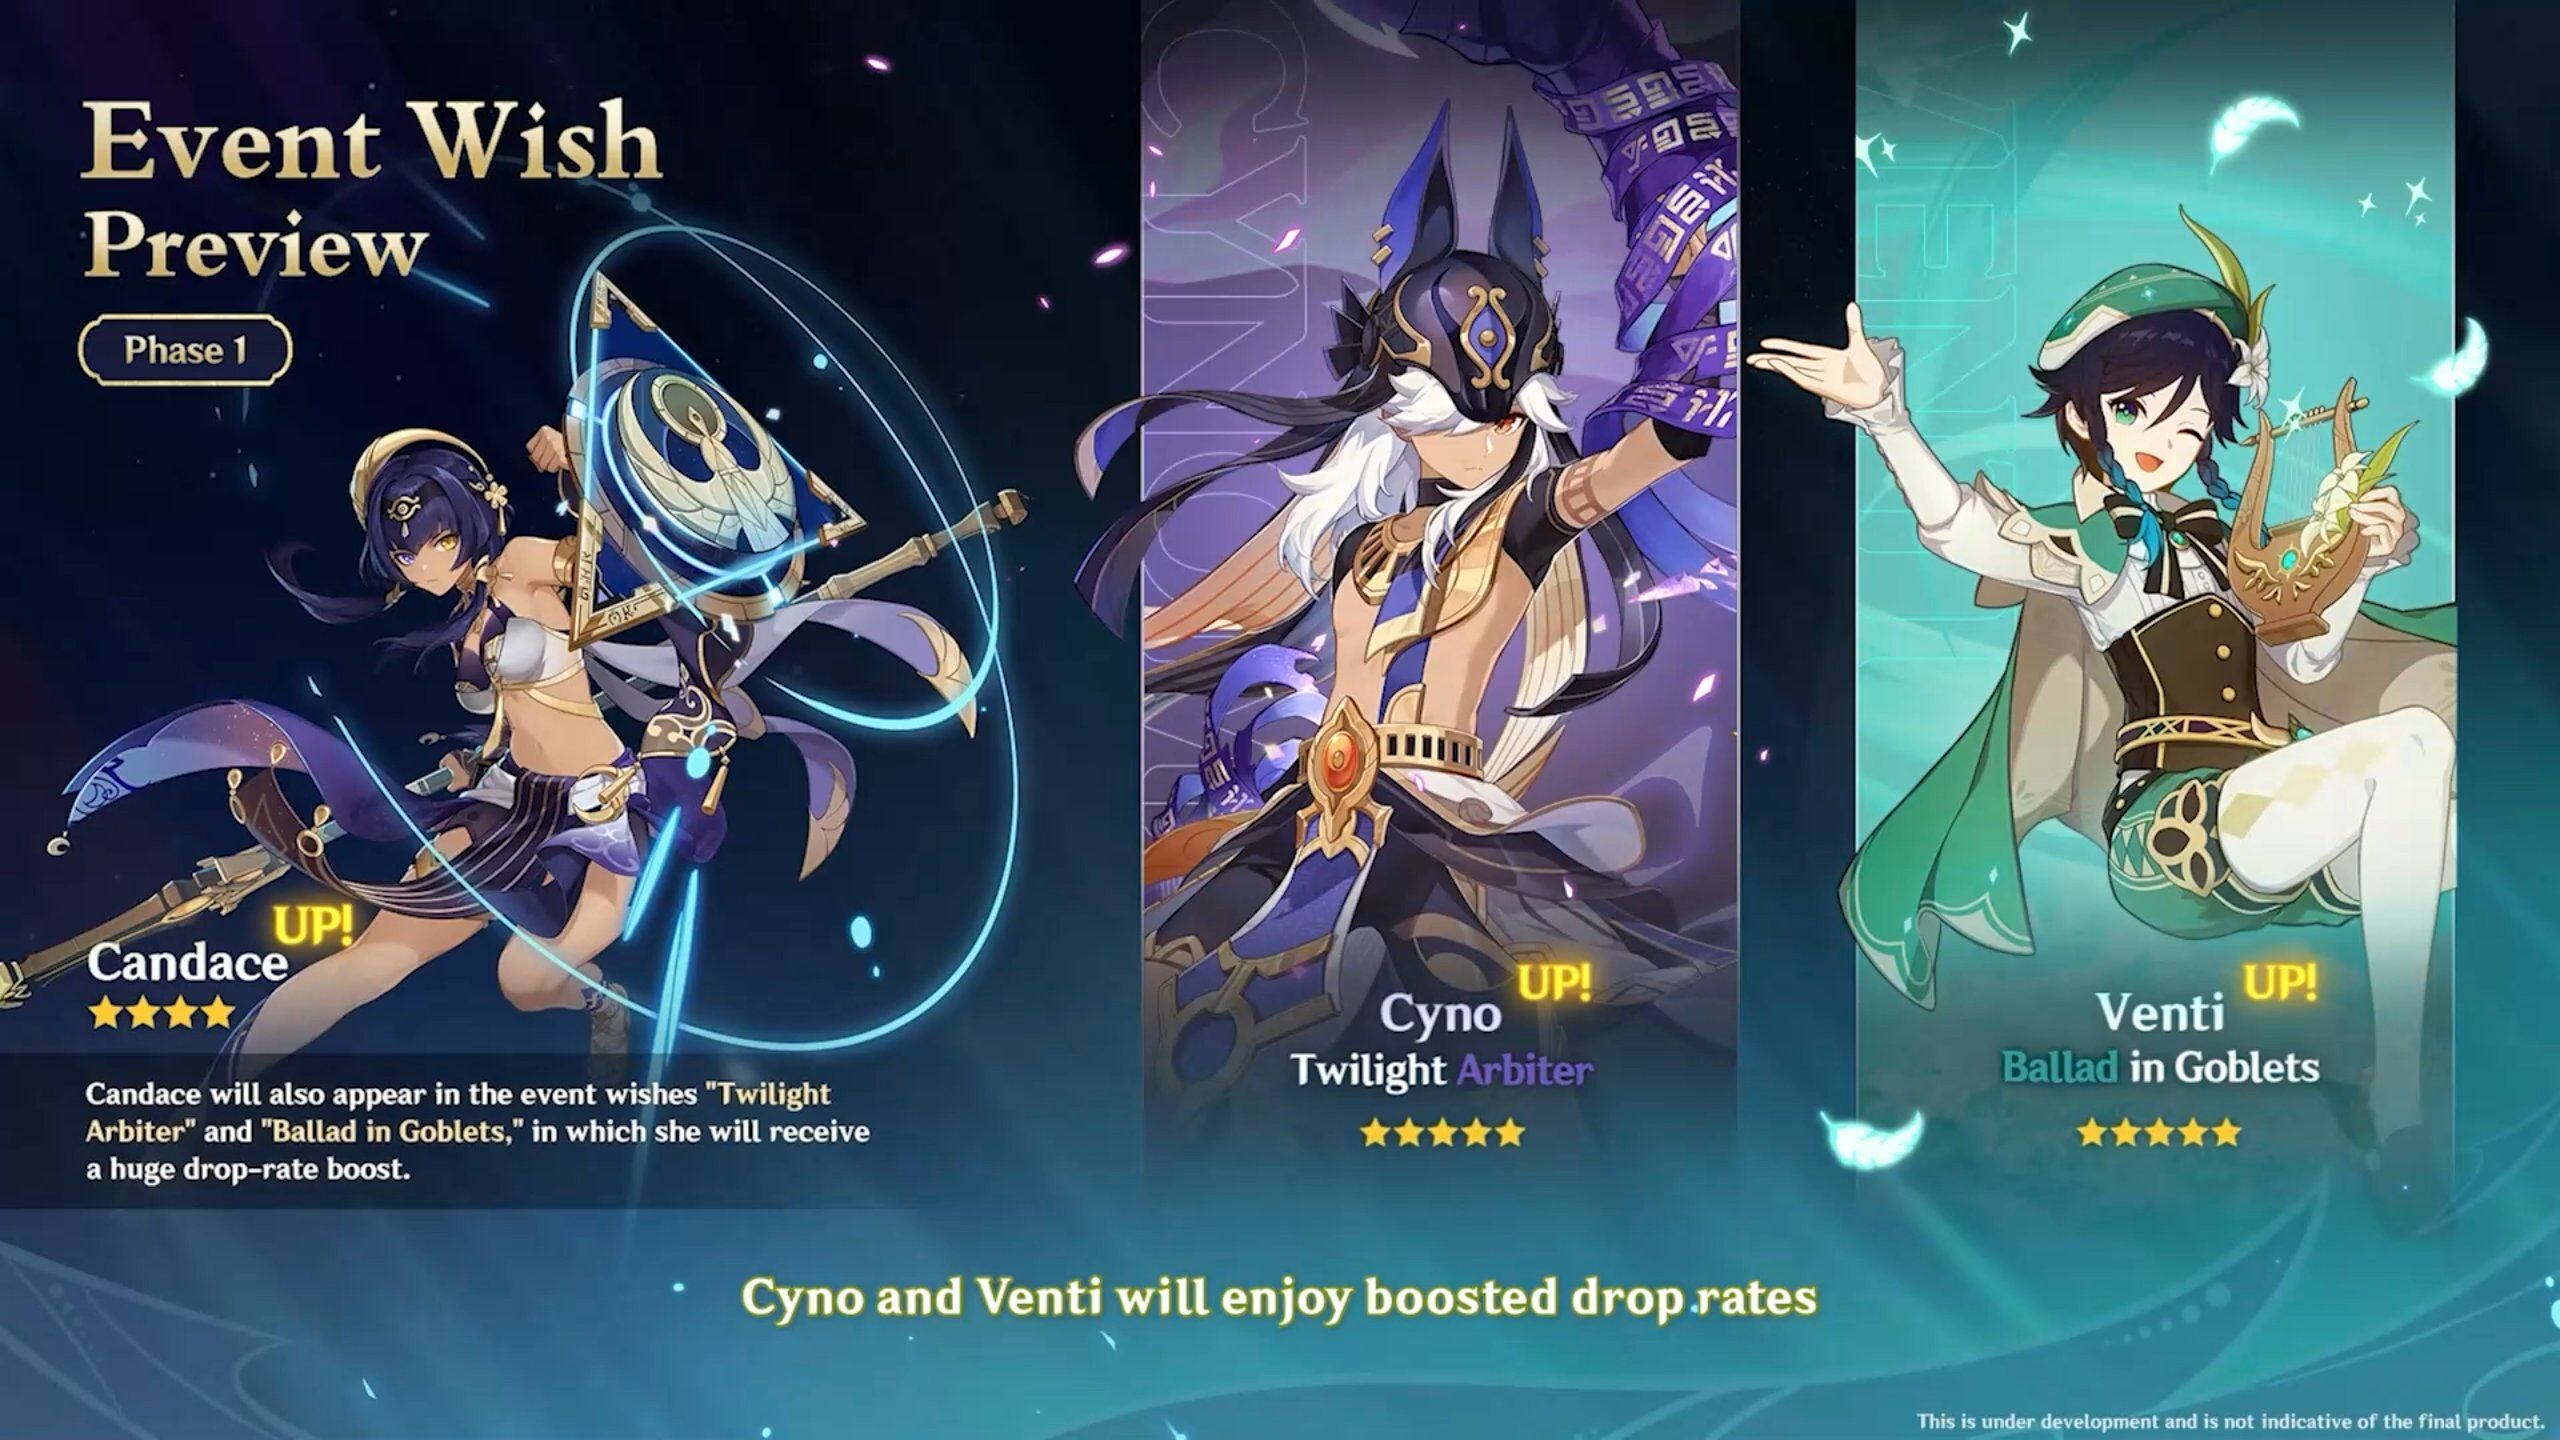 Genshin Impact 4.1 livestream date and time, 4.1 Banner leaks